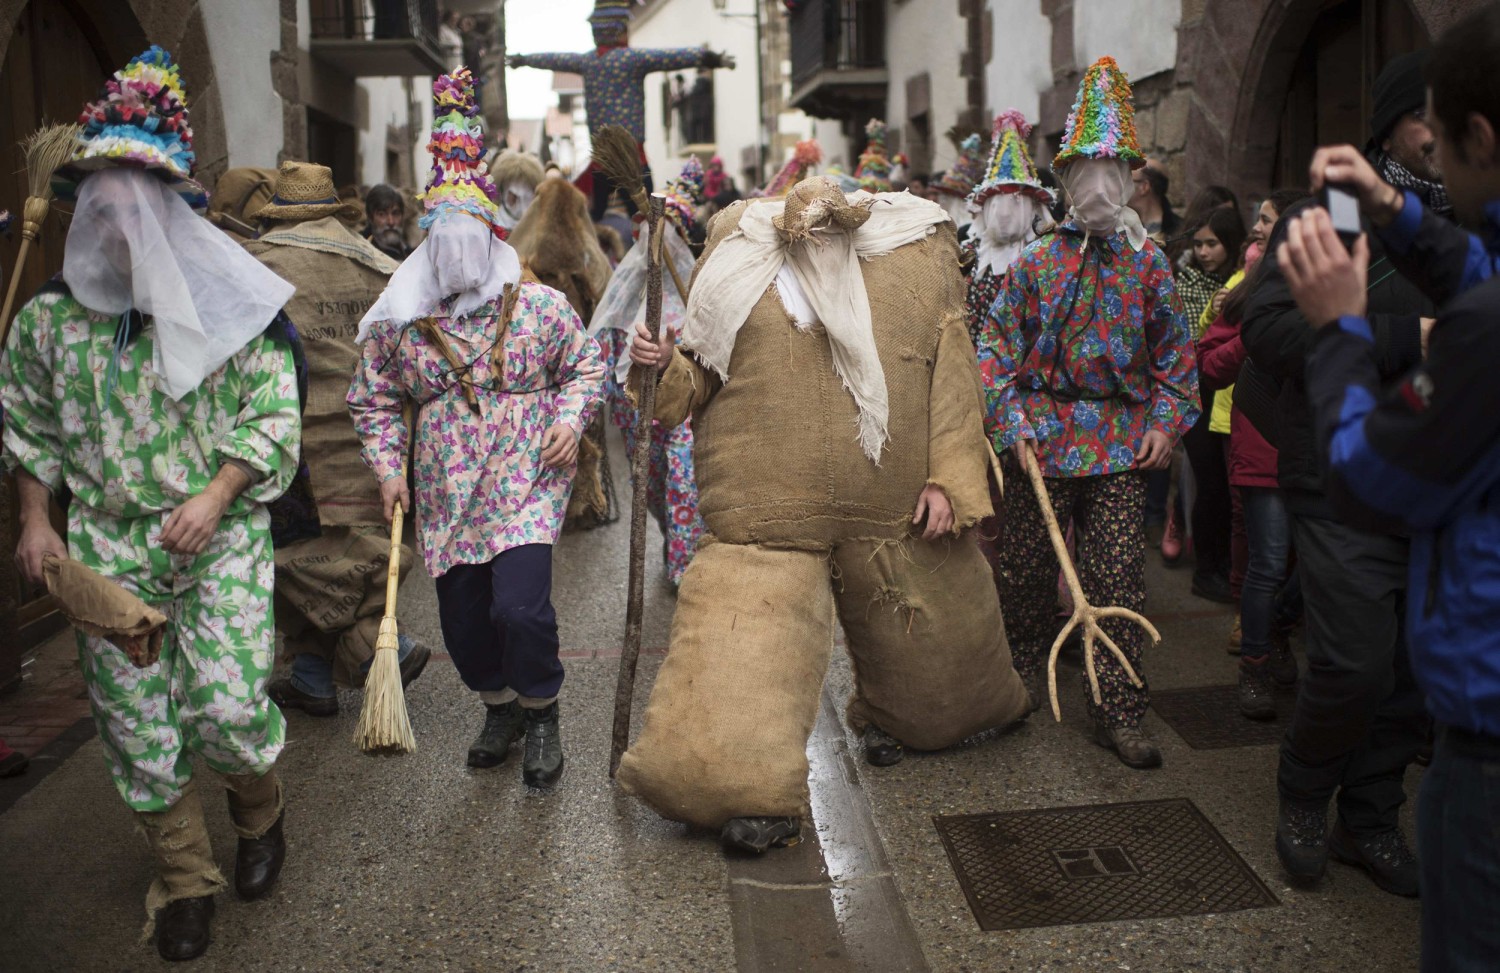 Binche Carnival and its folkloric Gilles | VISITWallonia.be